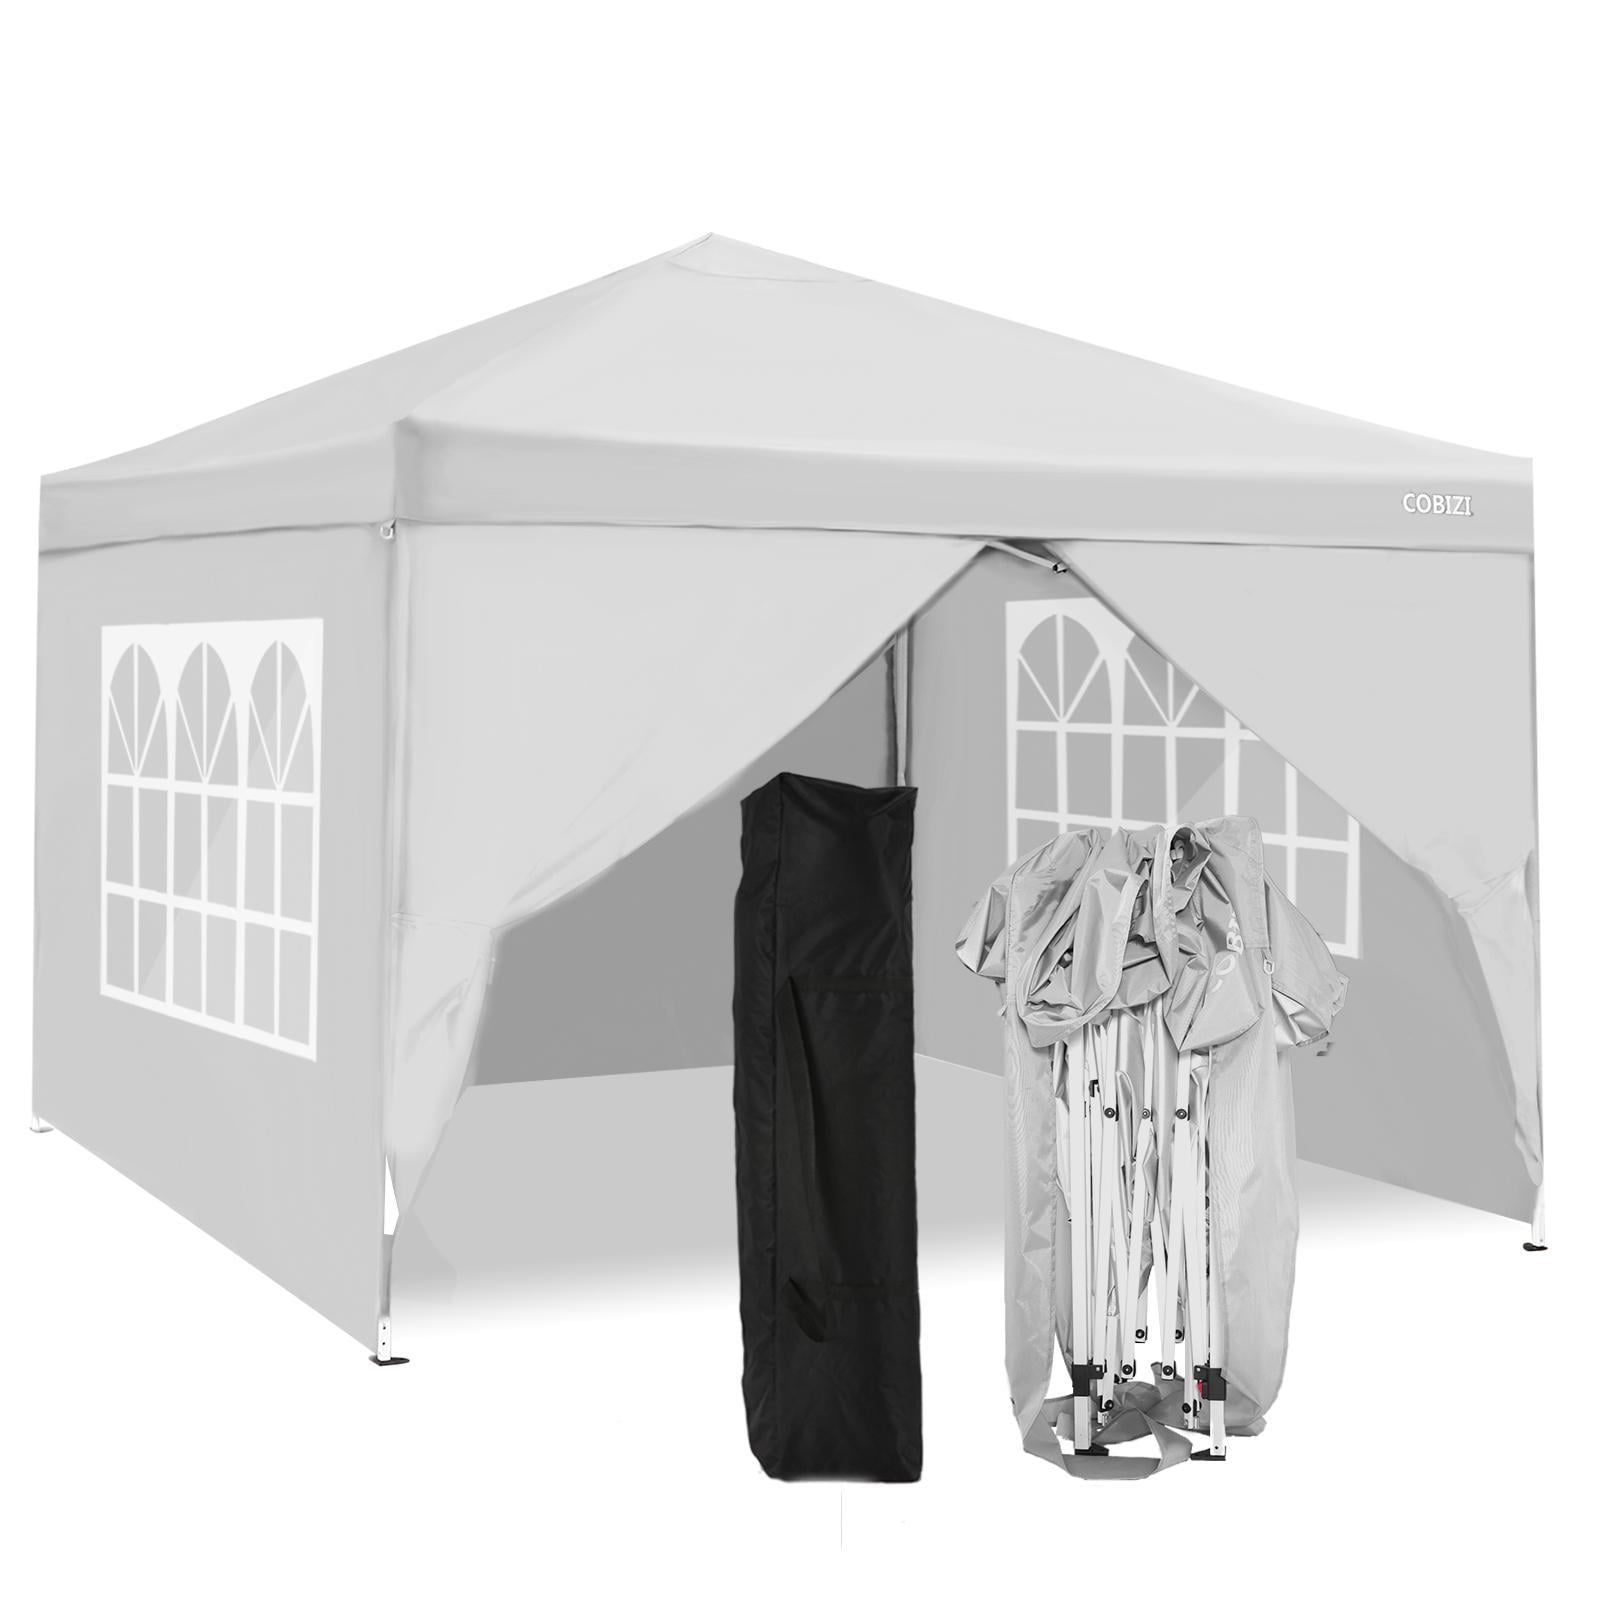 2Mx2M Gazebo Marquee Canopy w/ Sides Waterproof Pop-up Wedding Party Tent White 